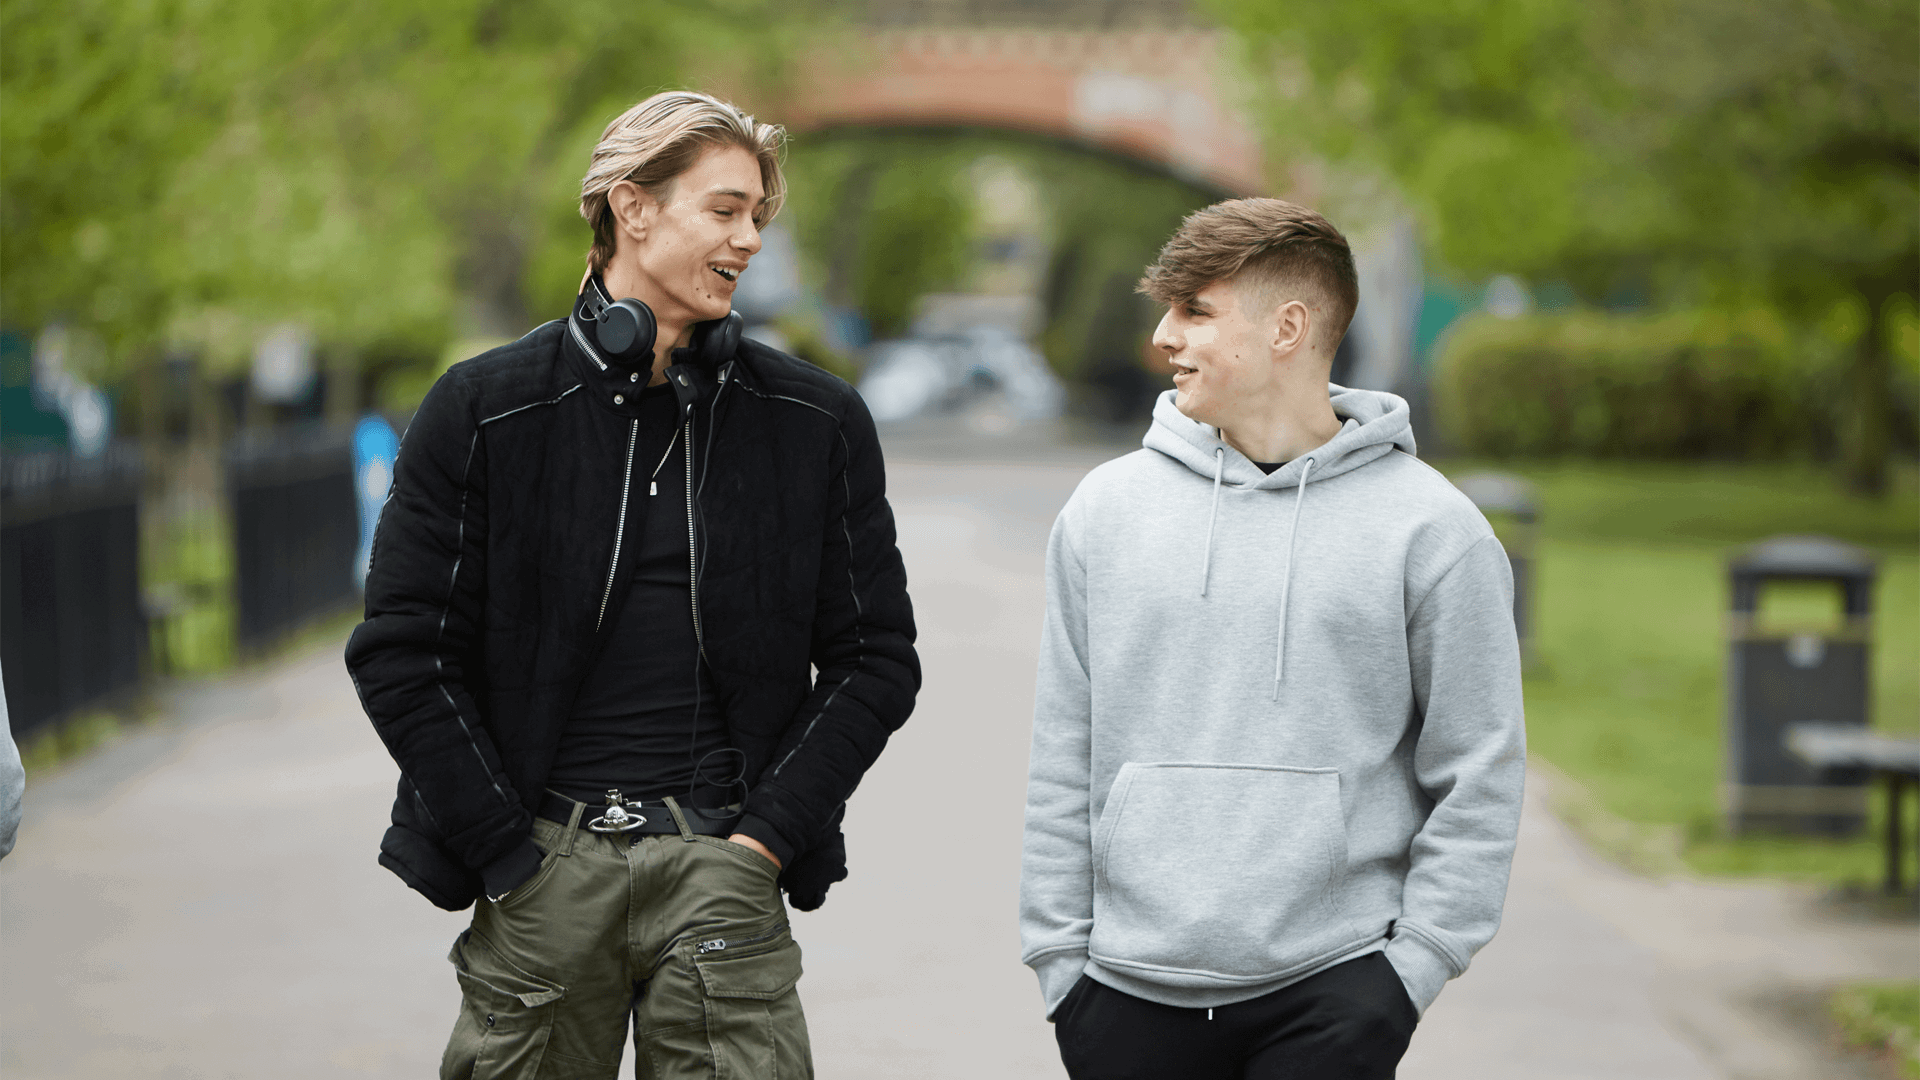 two-young-man-wearing-black-jacket-with-headphones-on-his-neck-and-hands-on-the-pockets-of-his-trousers-talking-while-walking-with-another-boy-wearin-grey-hoodie-on-a-street